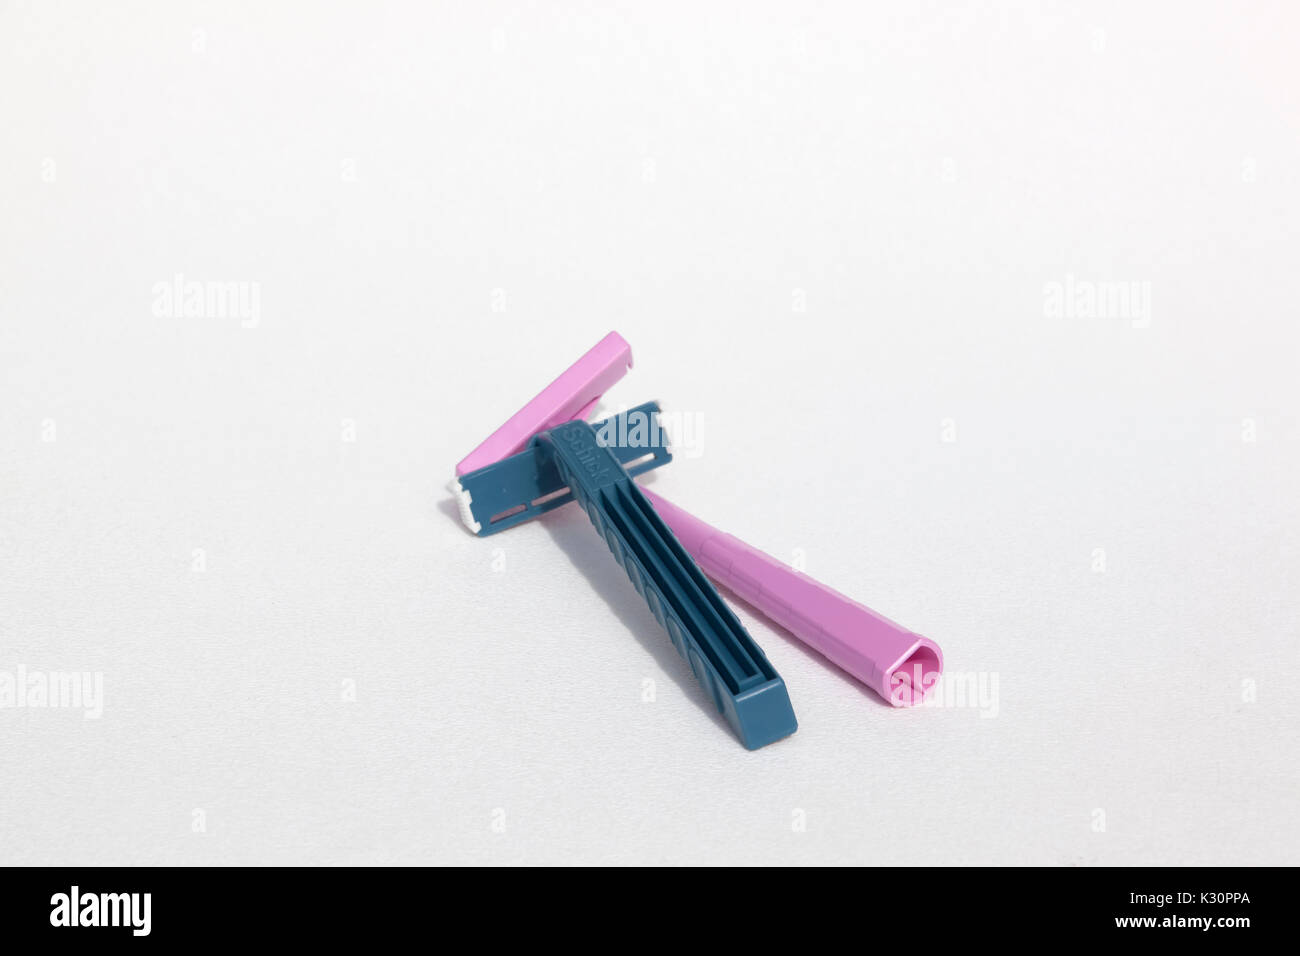 A blue Schick disposable & pink Bic disposable razor both made from the plastic, polypropylene. Stock Photo